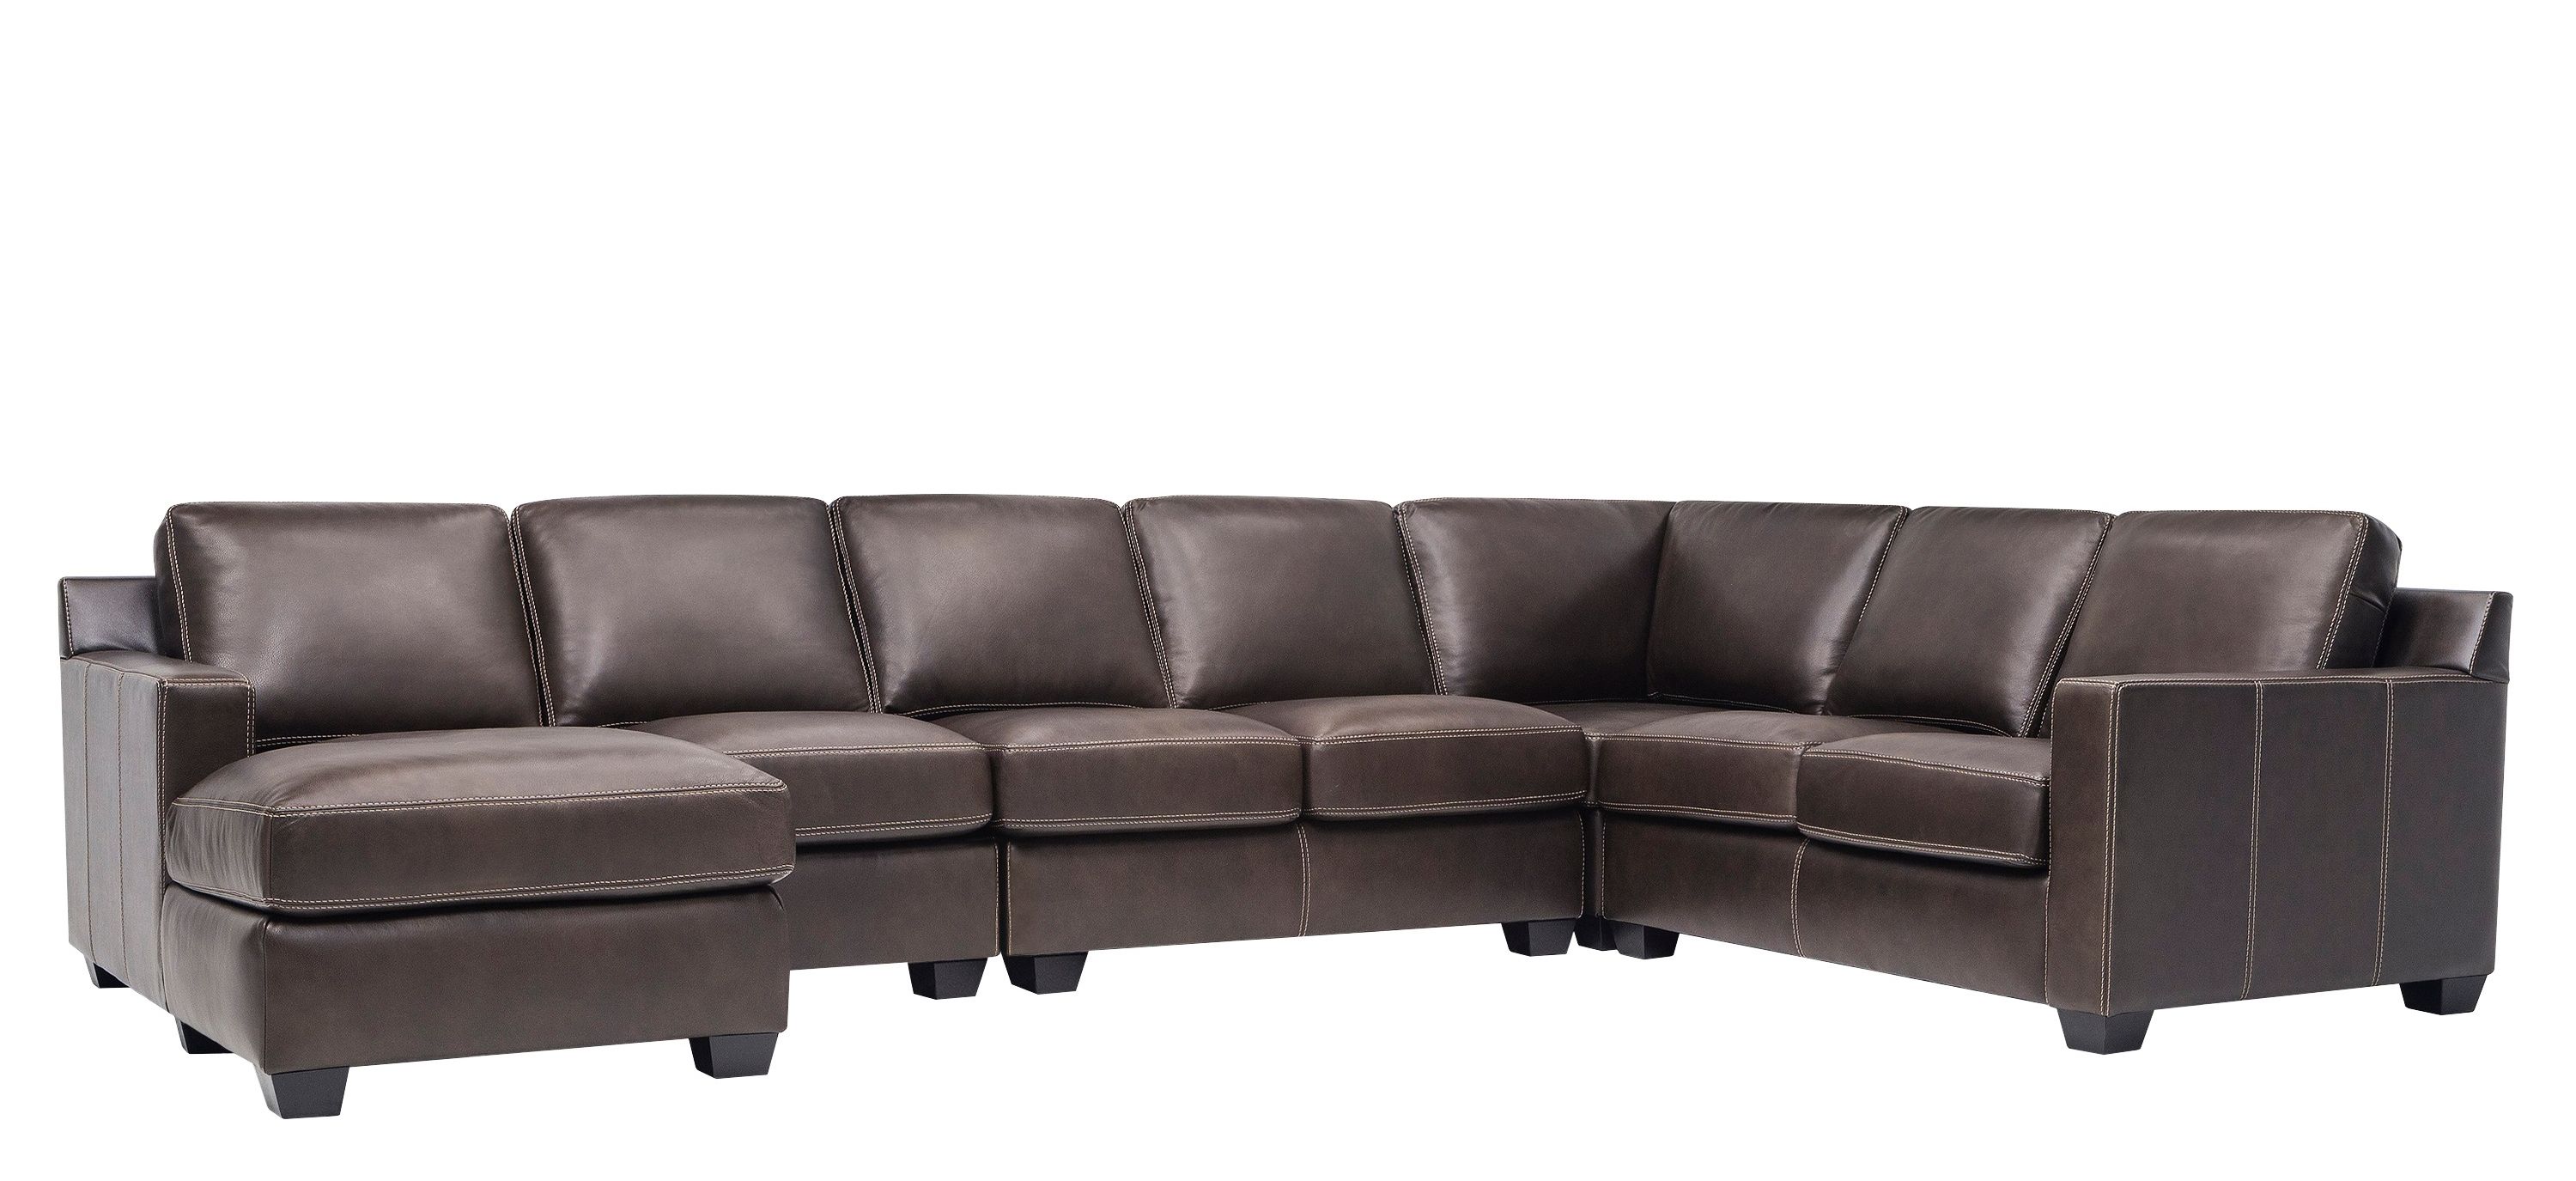 Anaheim Leather 5-pc. Sectional